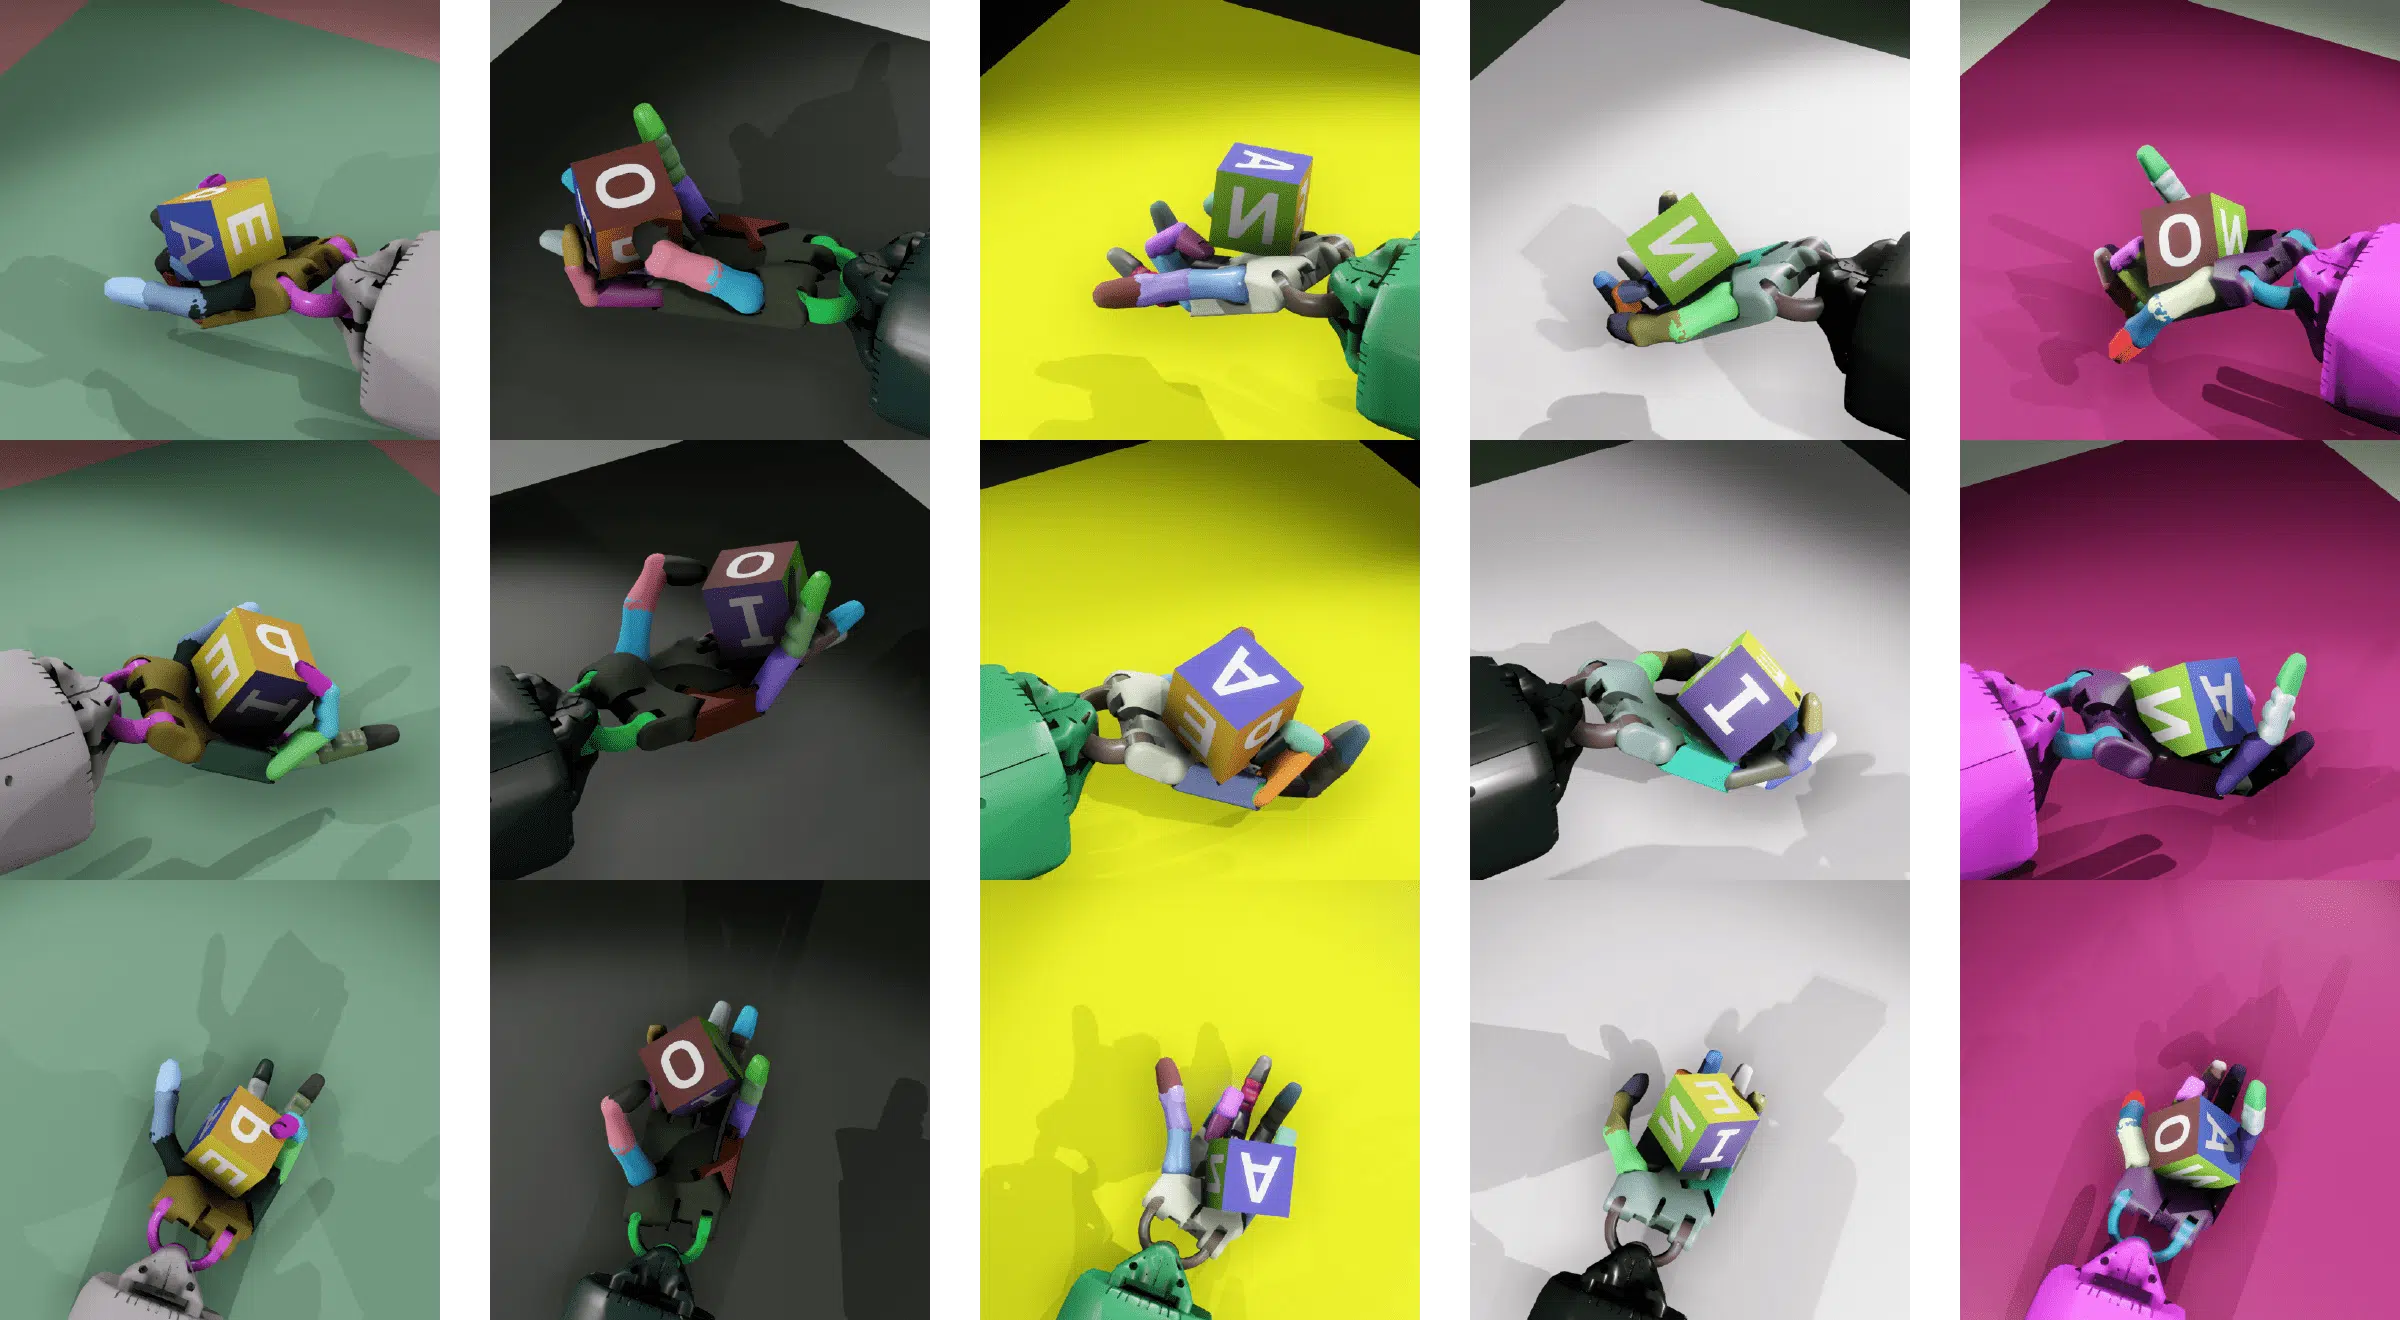 dexterous hand series - openai shadow dexterous hand simulated camera grid.png